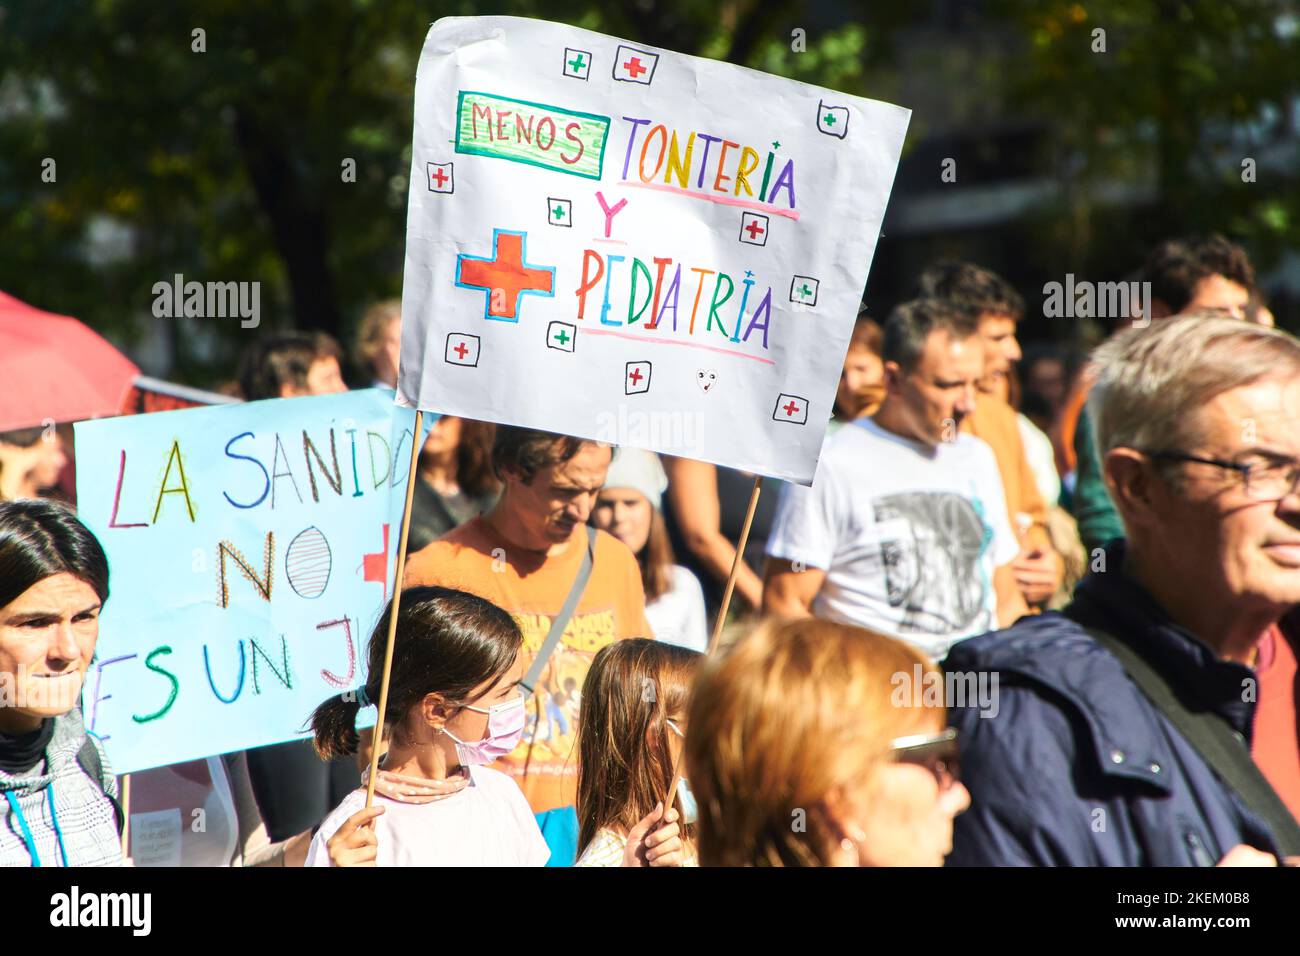 young children protesting in favor of public health on public demonstration with a banner with text 'less nonsense and more pediatrics' on 13th nov 22 Stock Photo